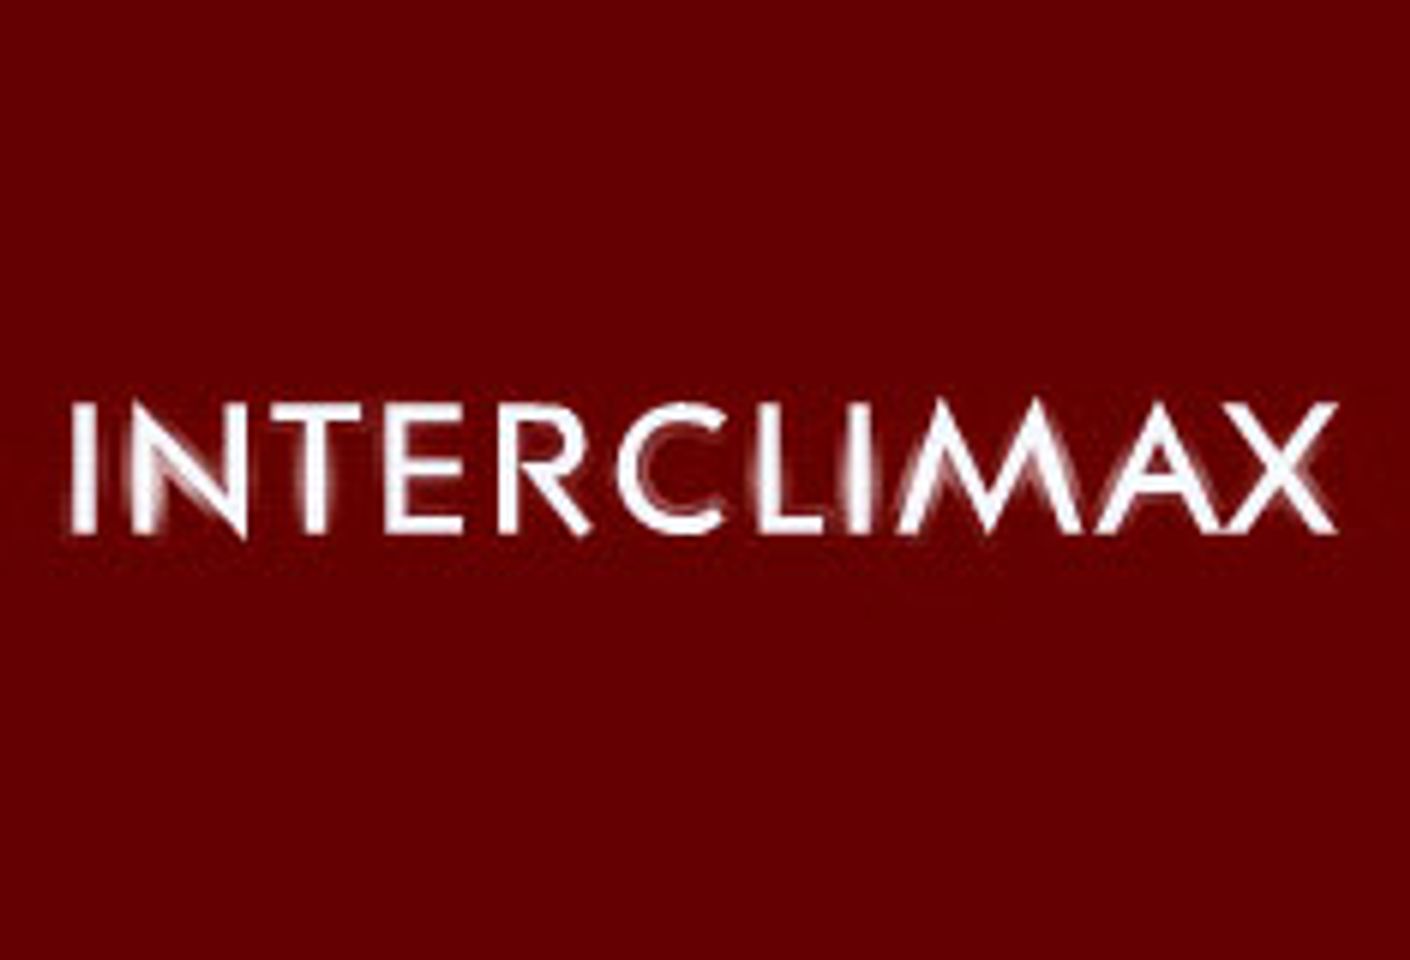 InterClimax Launching One-on-One Live Gay Video Feeds